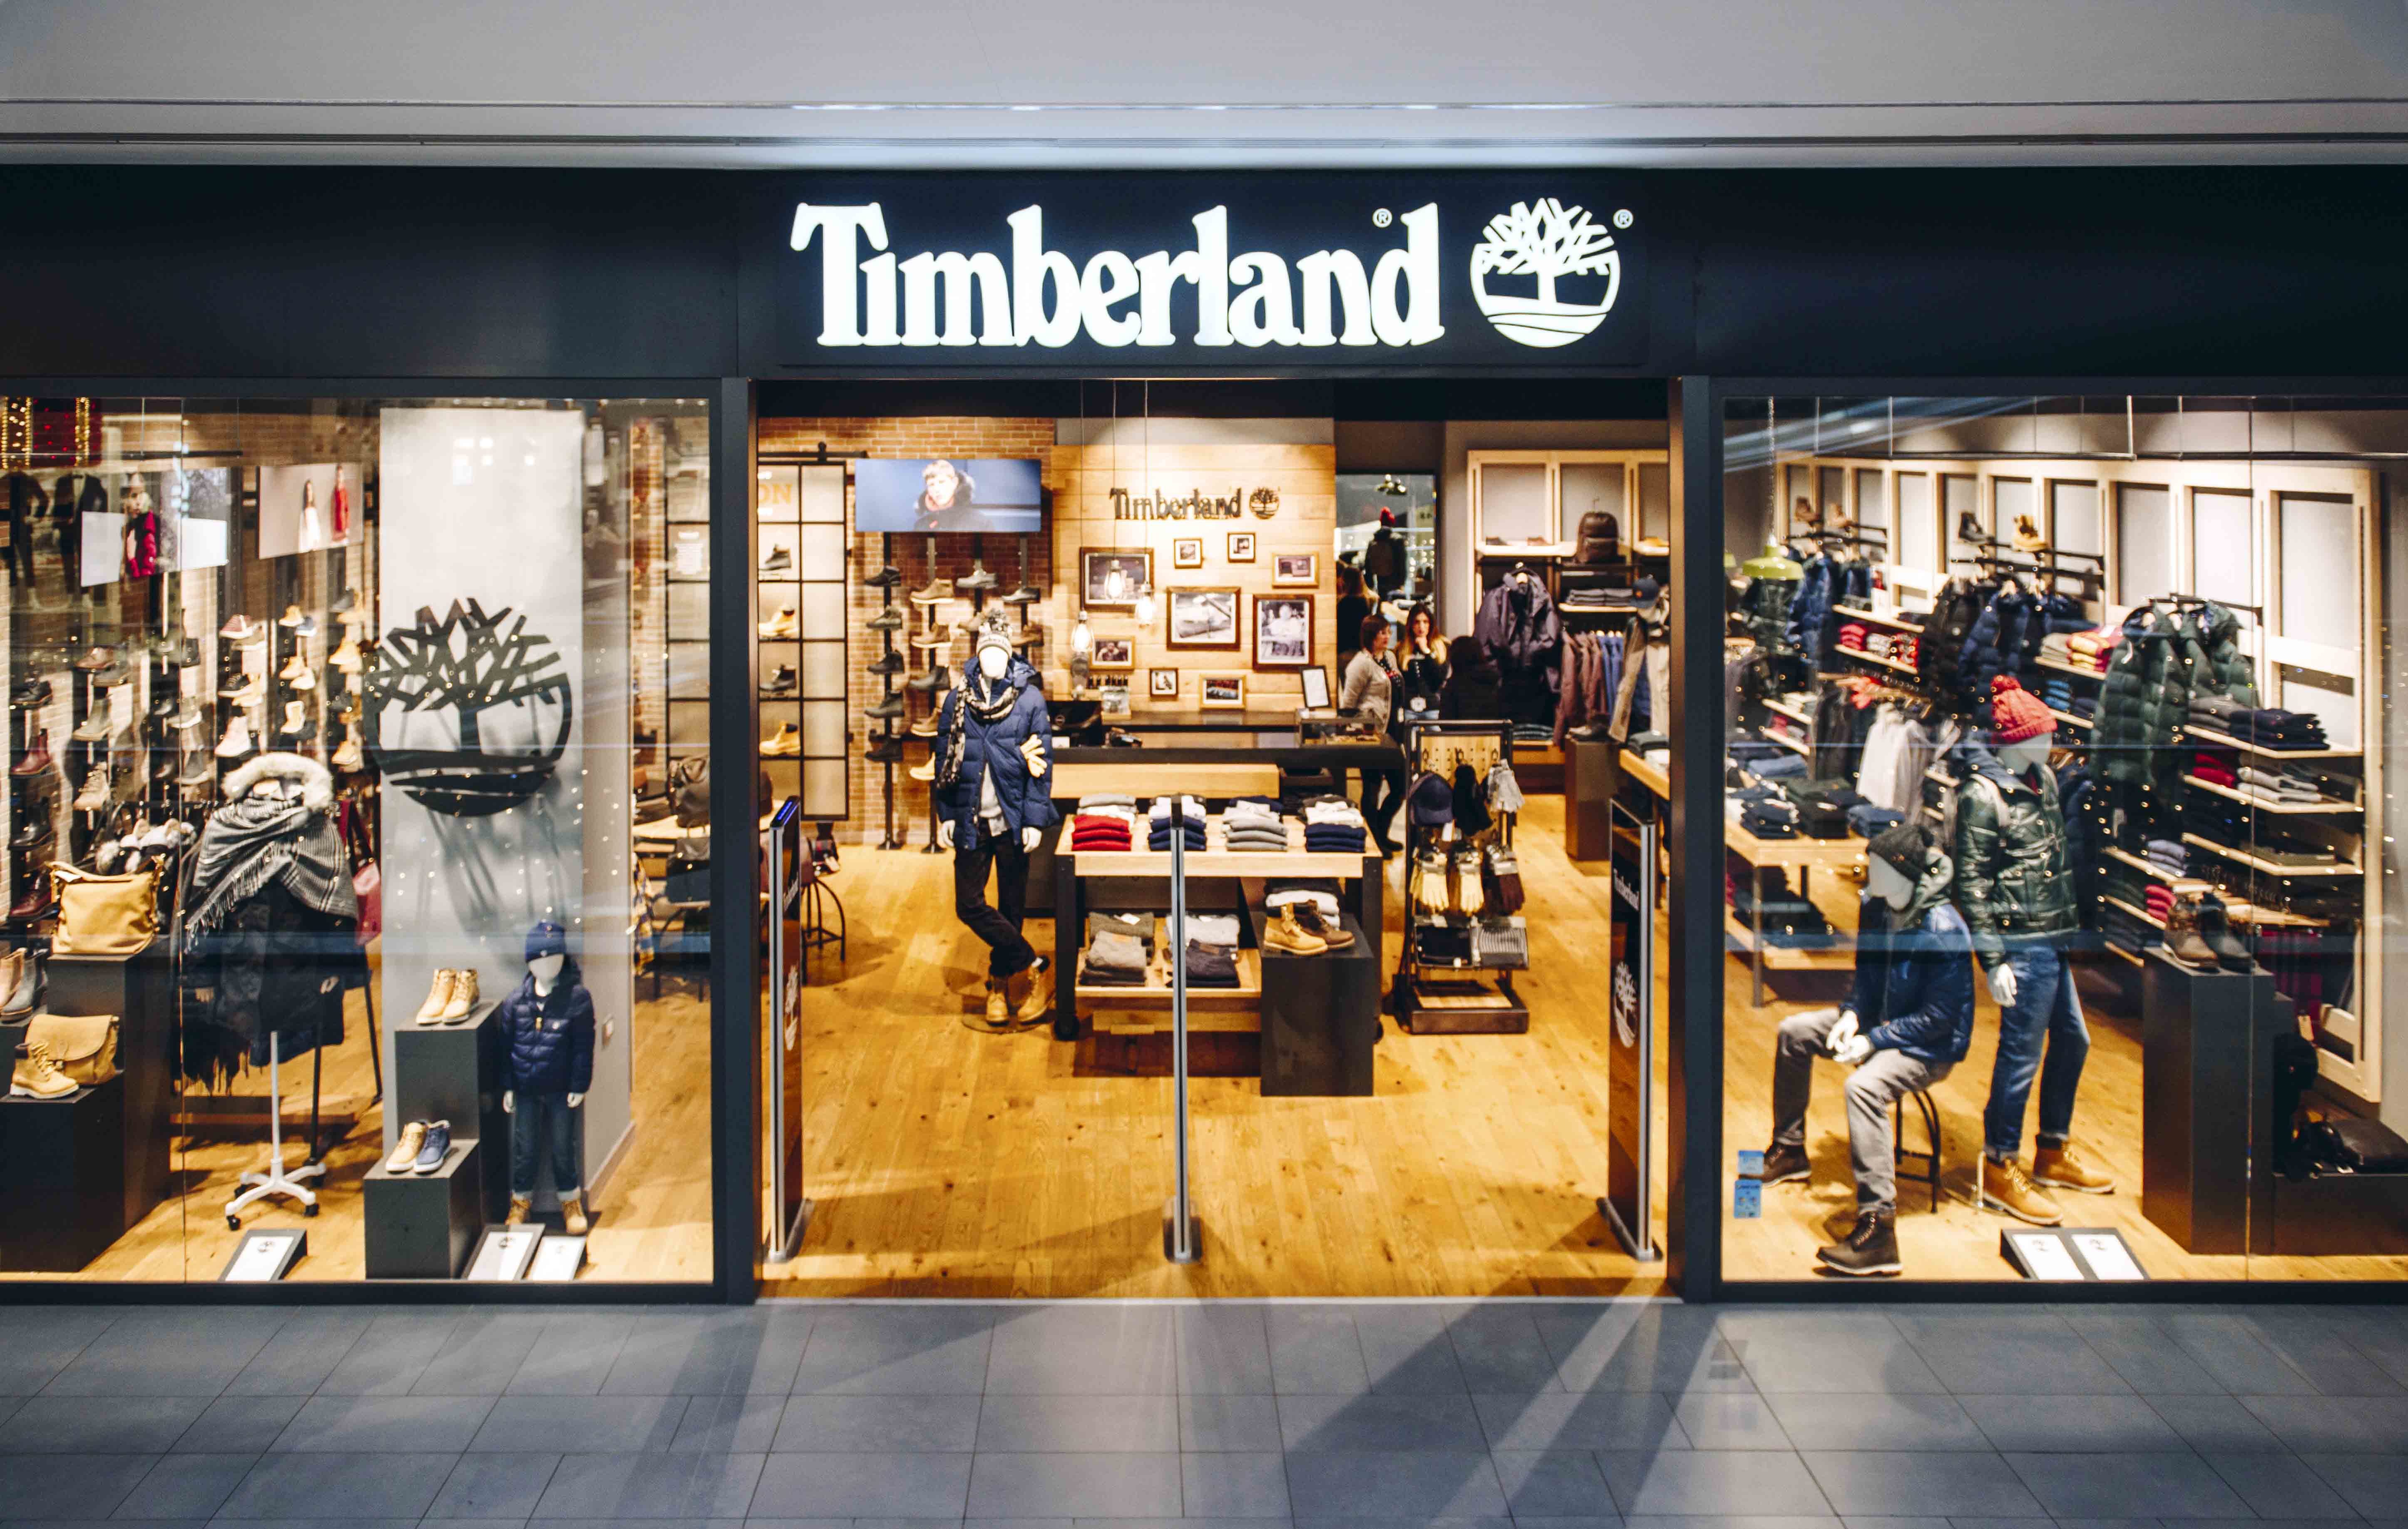 castel romano outlet timberland